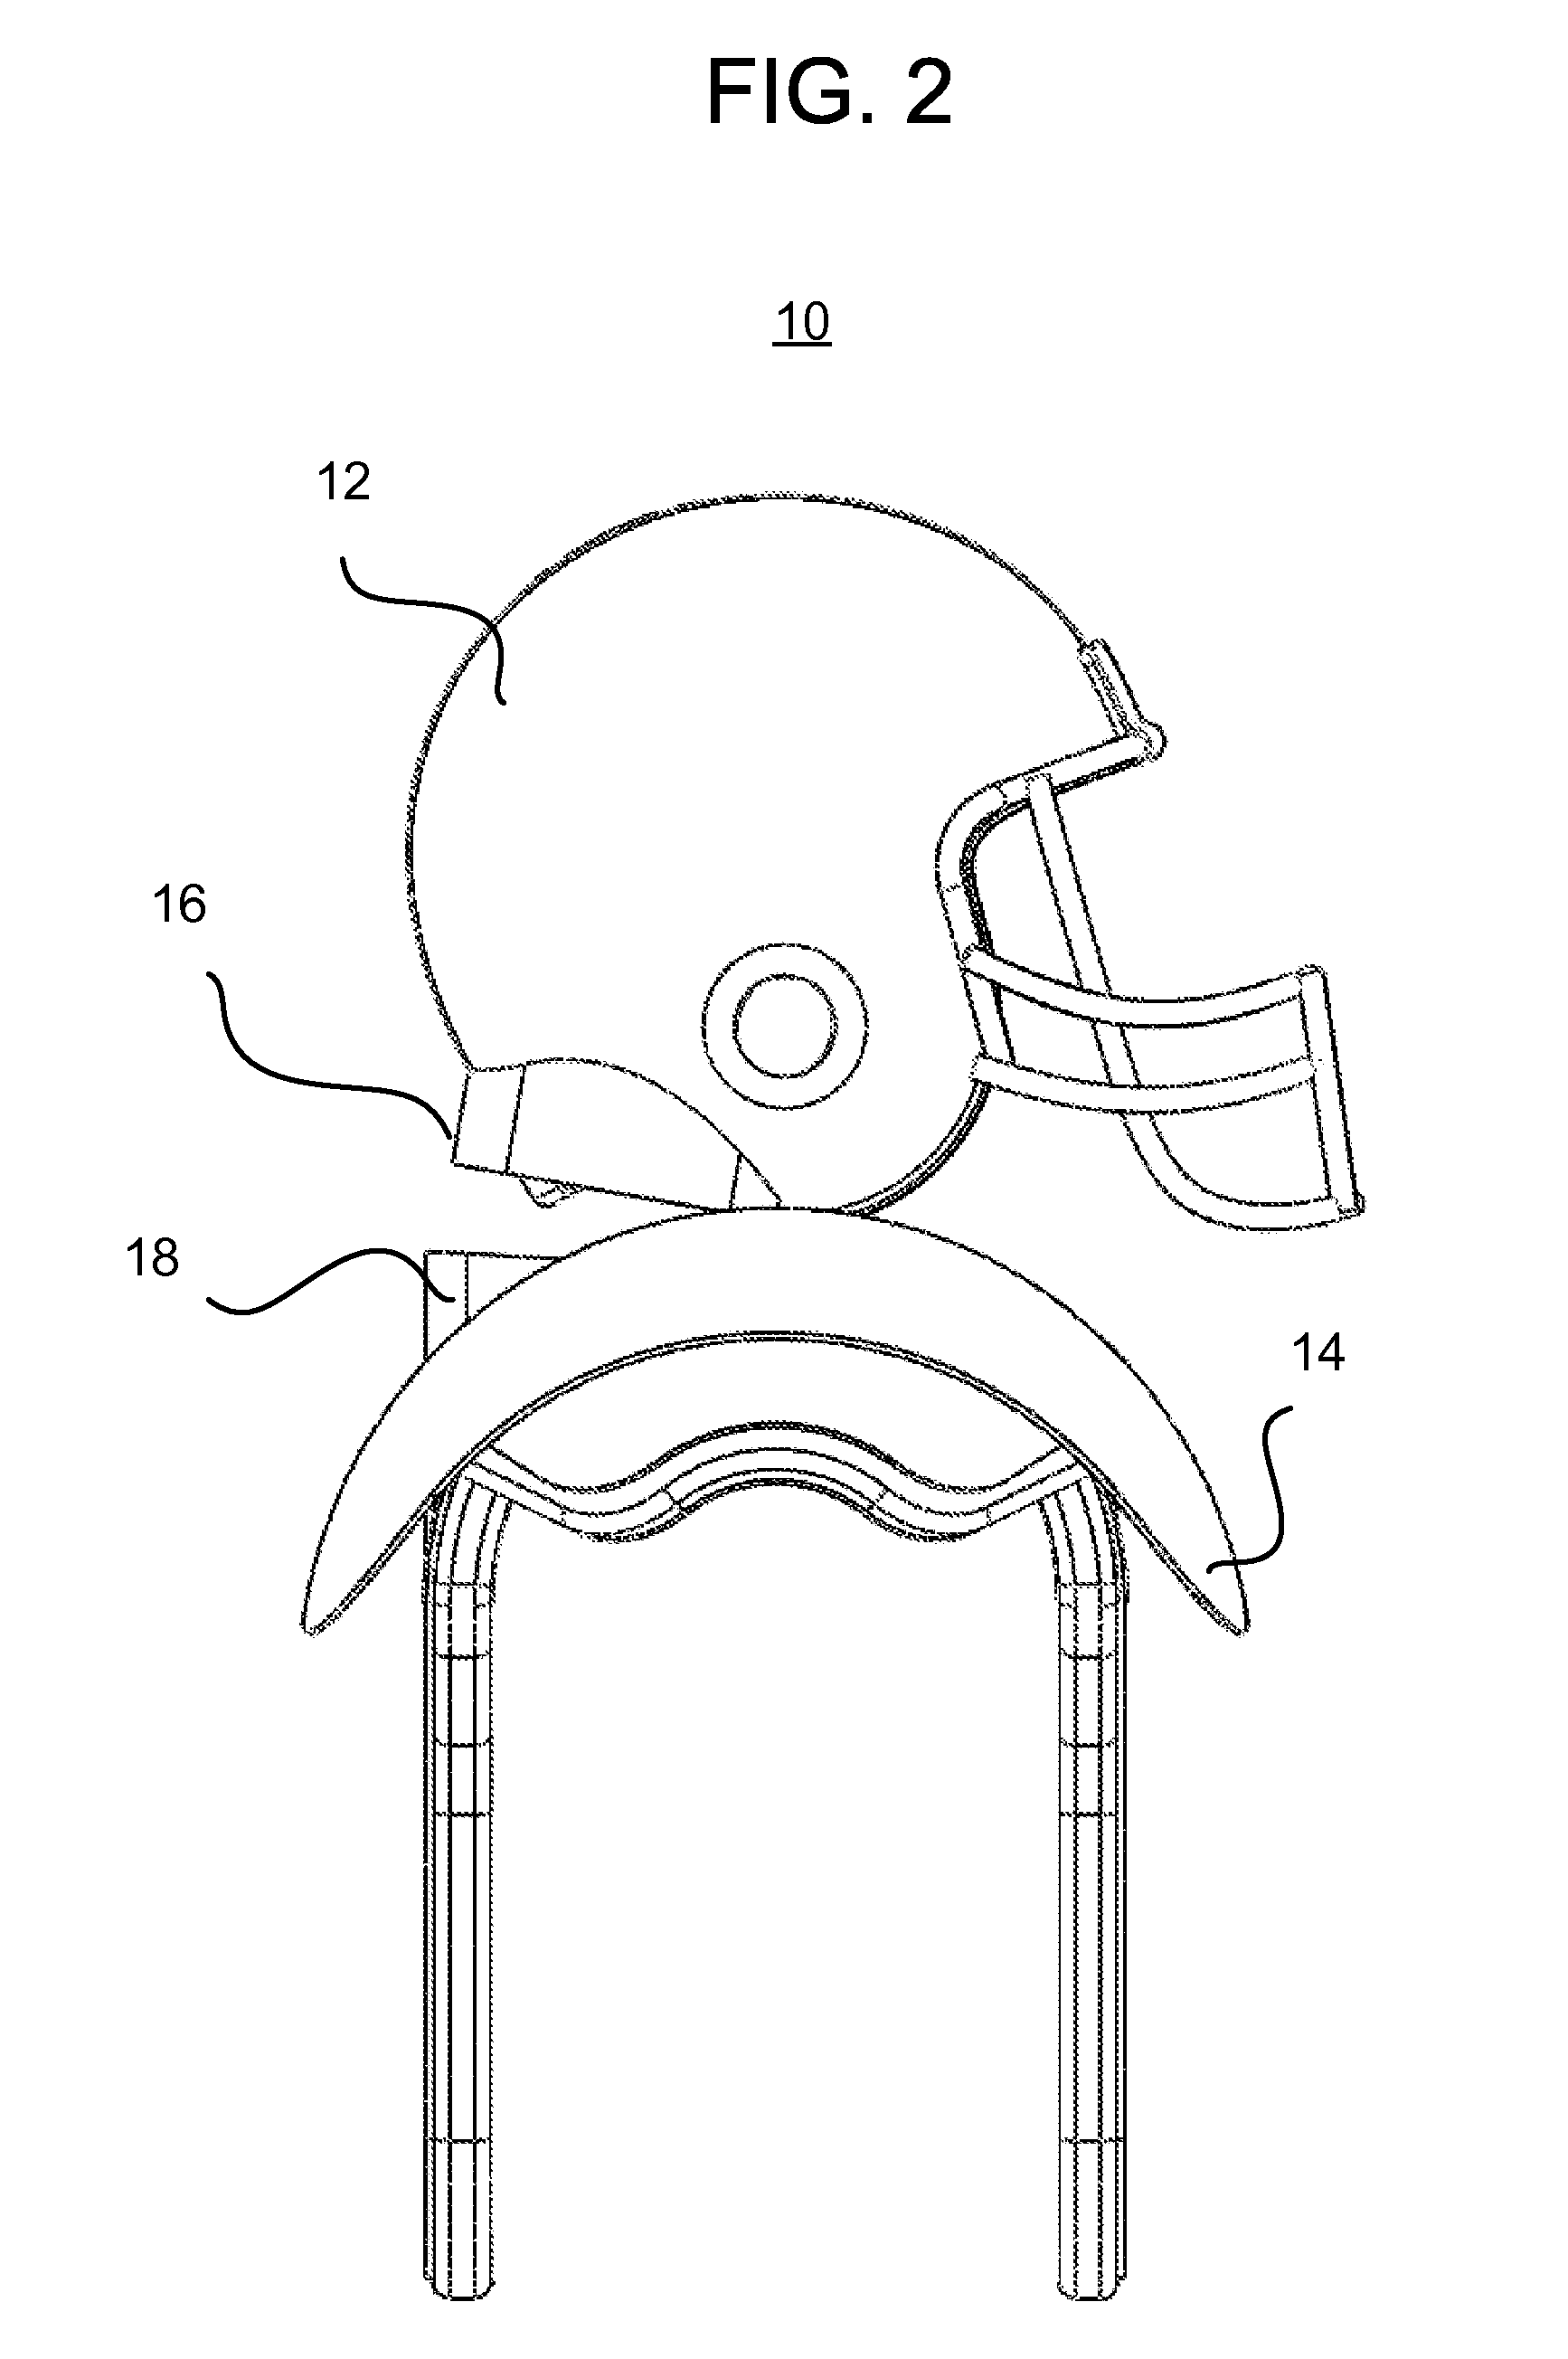 Apparatus for preventing head or neck injury using magnetic assistance